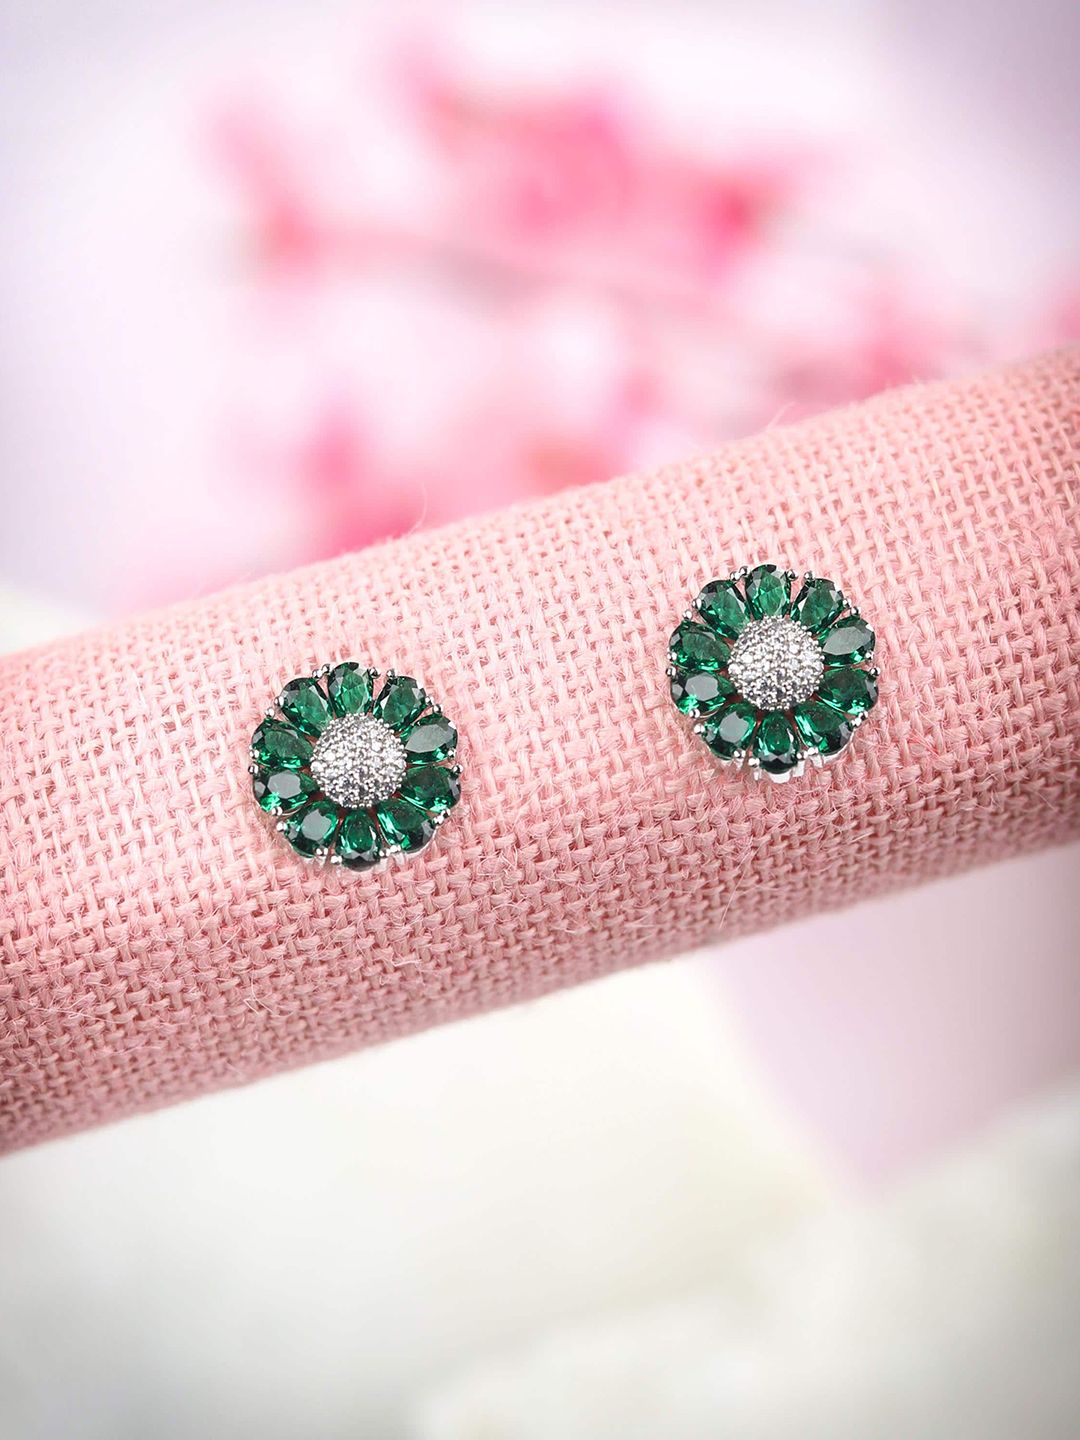 Priyaasi Silver-Toned & Green Contemporary Studs Earrings Price in India